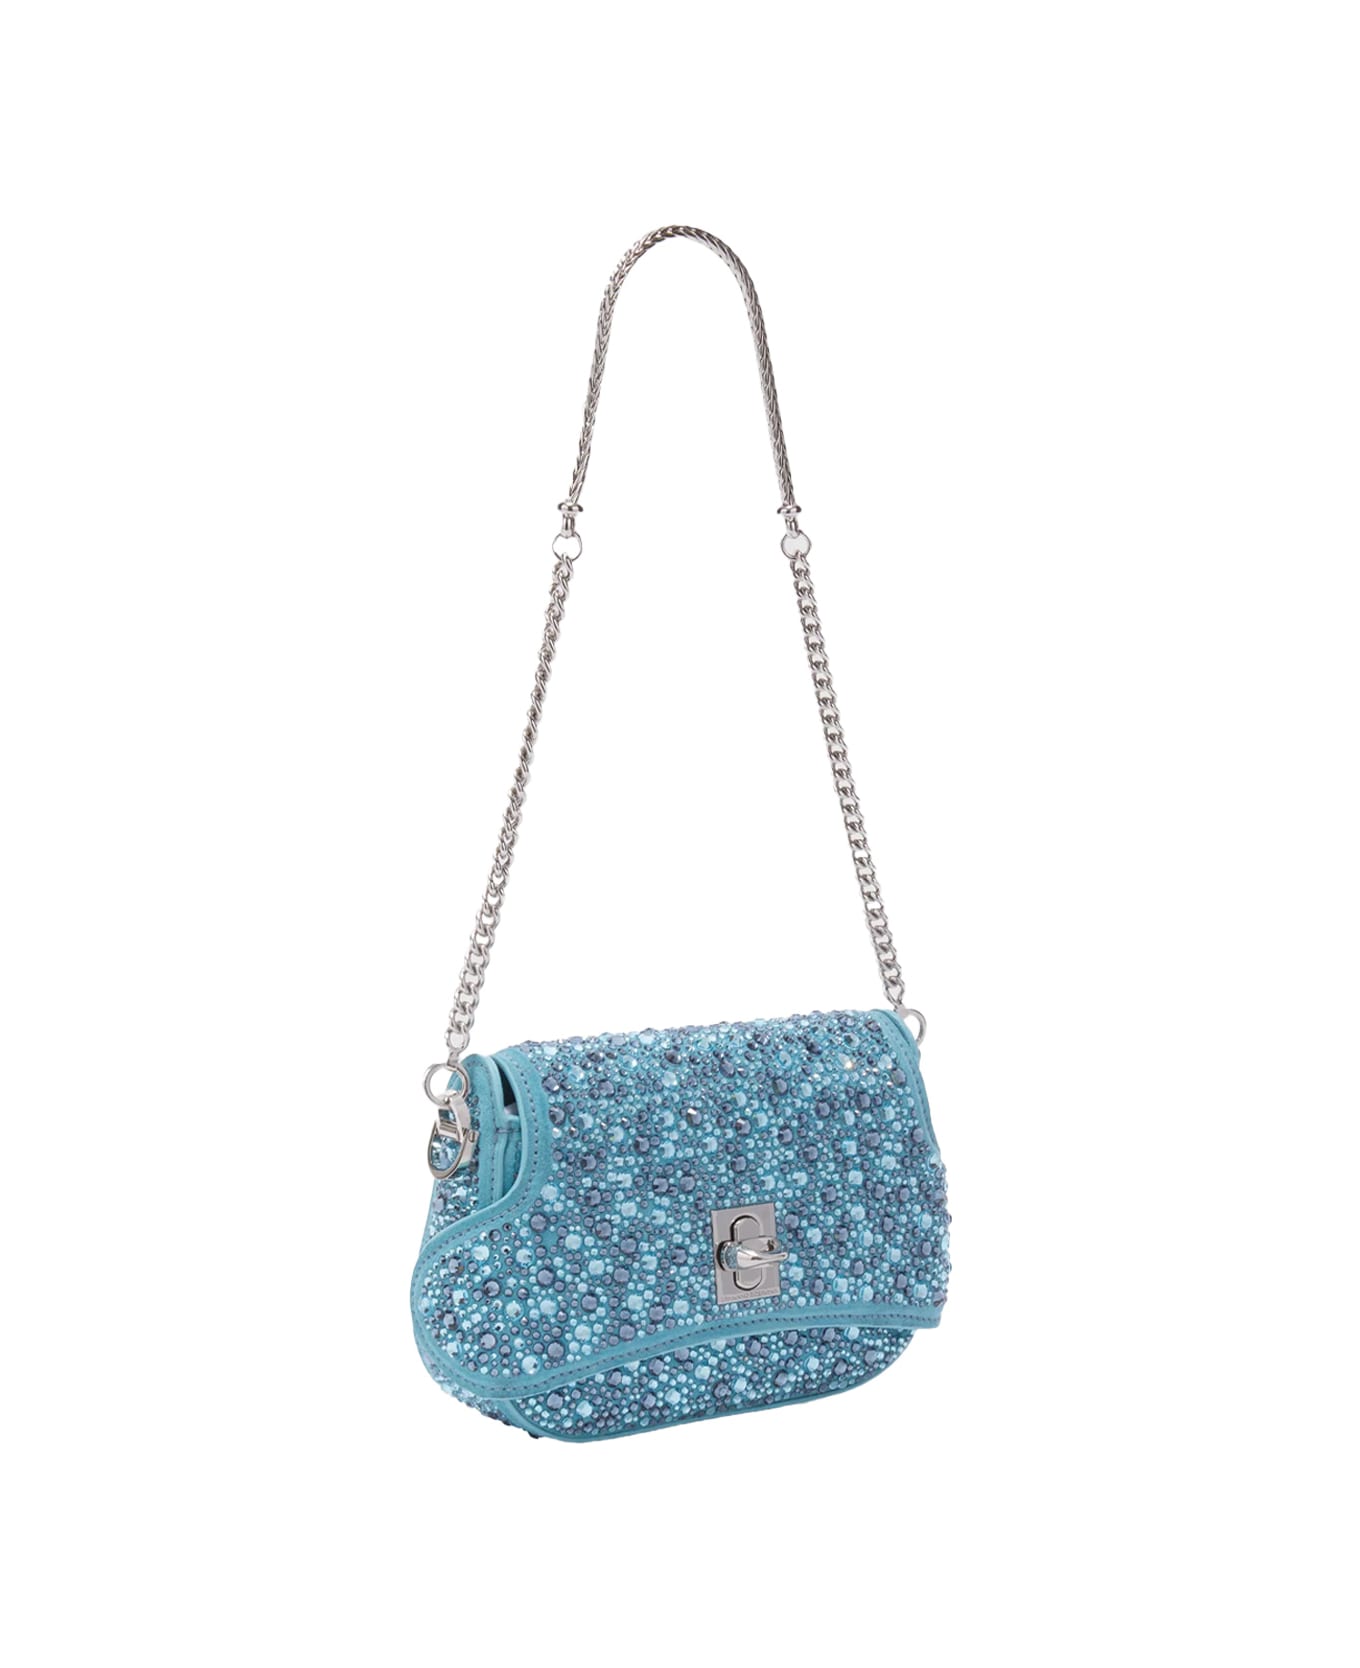 Ermanno Scervino Light Blue Audrey Bag With Crystals - Blue ショルダーバッグ